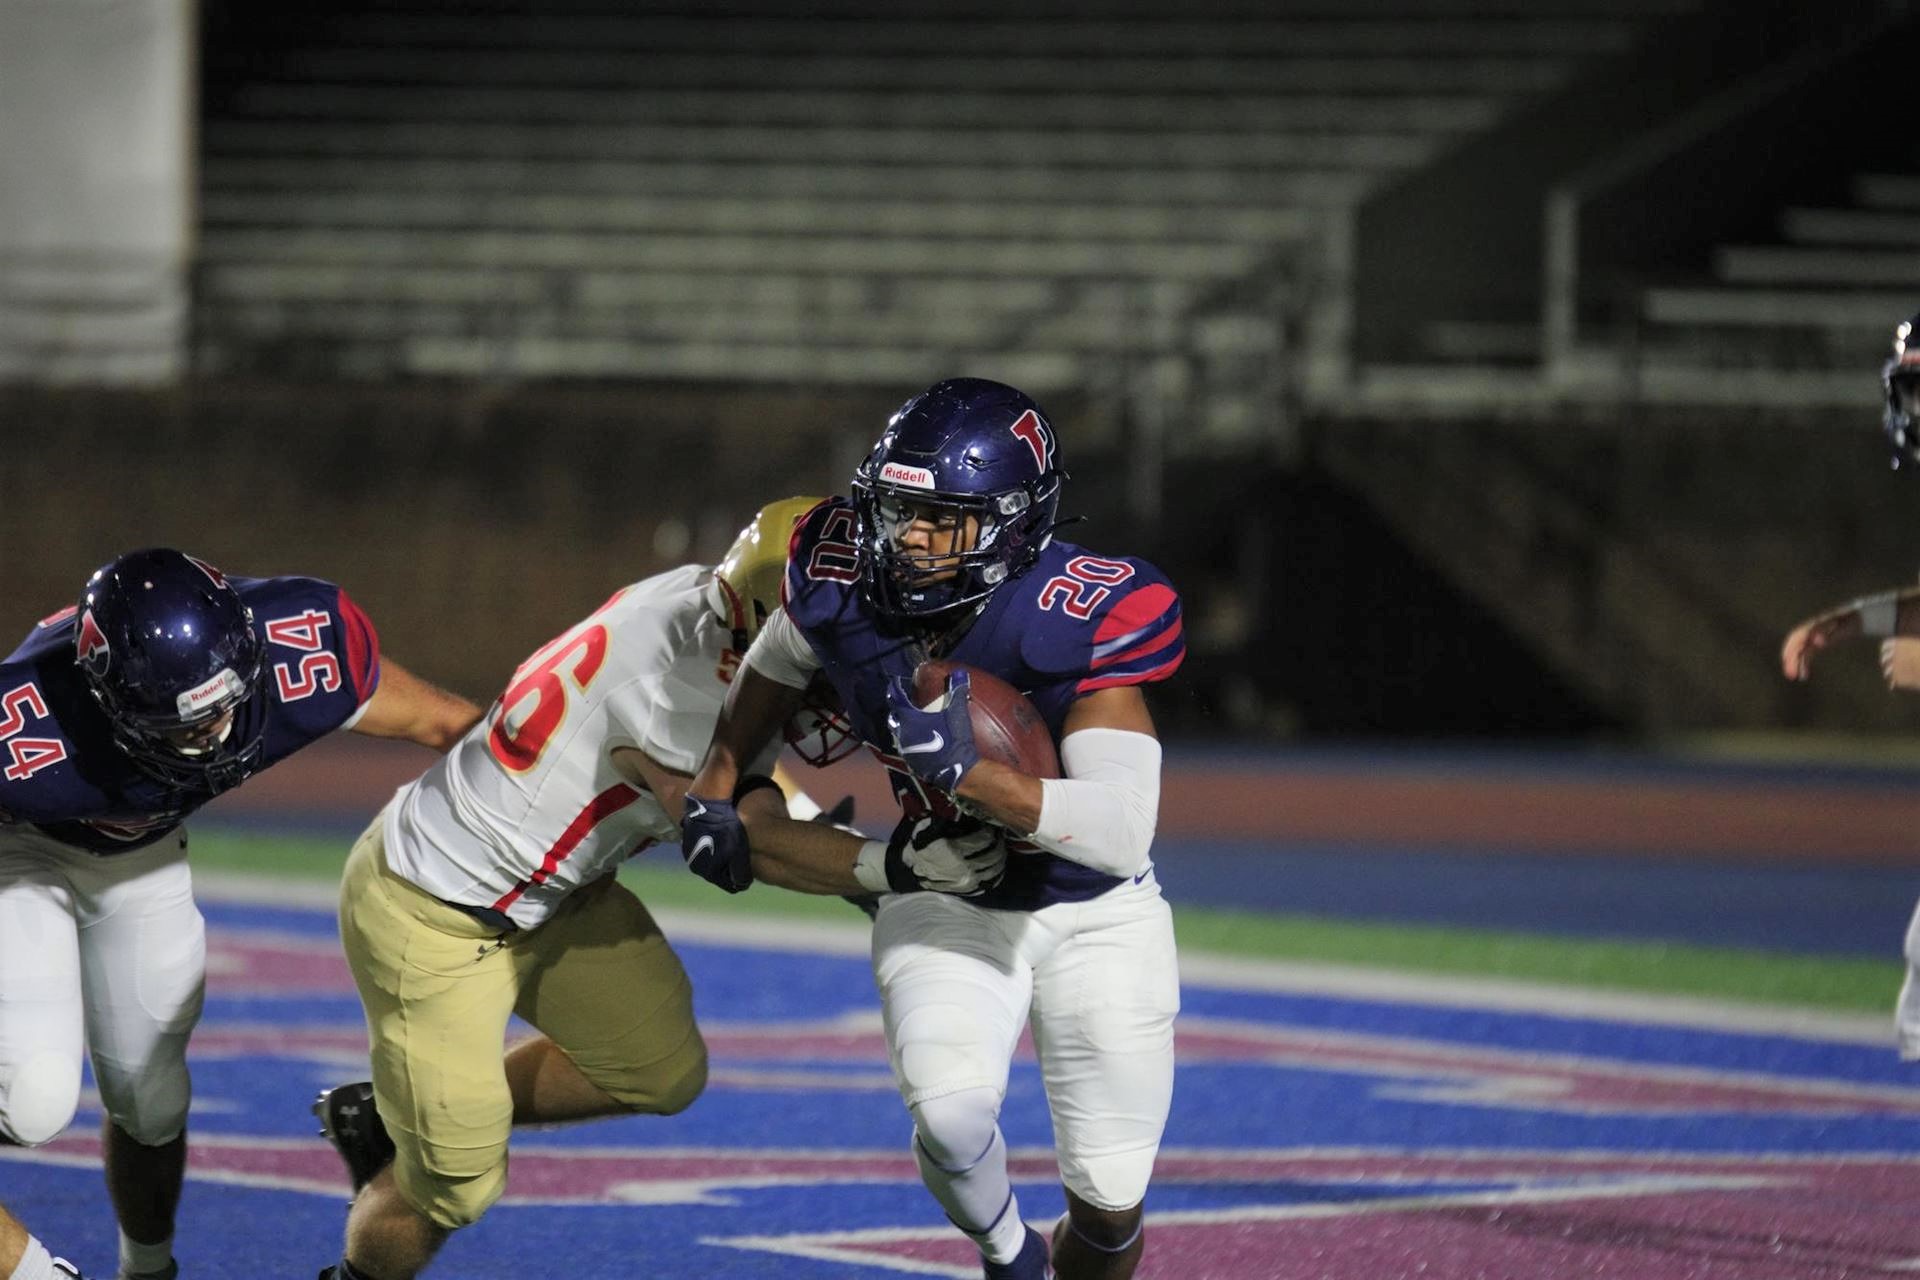 Senior running back Laquan McKever runs the ball out of the endzone at Franklin Field.